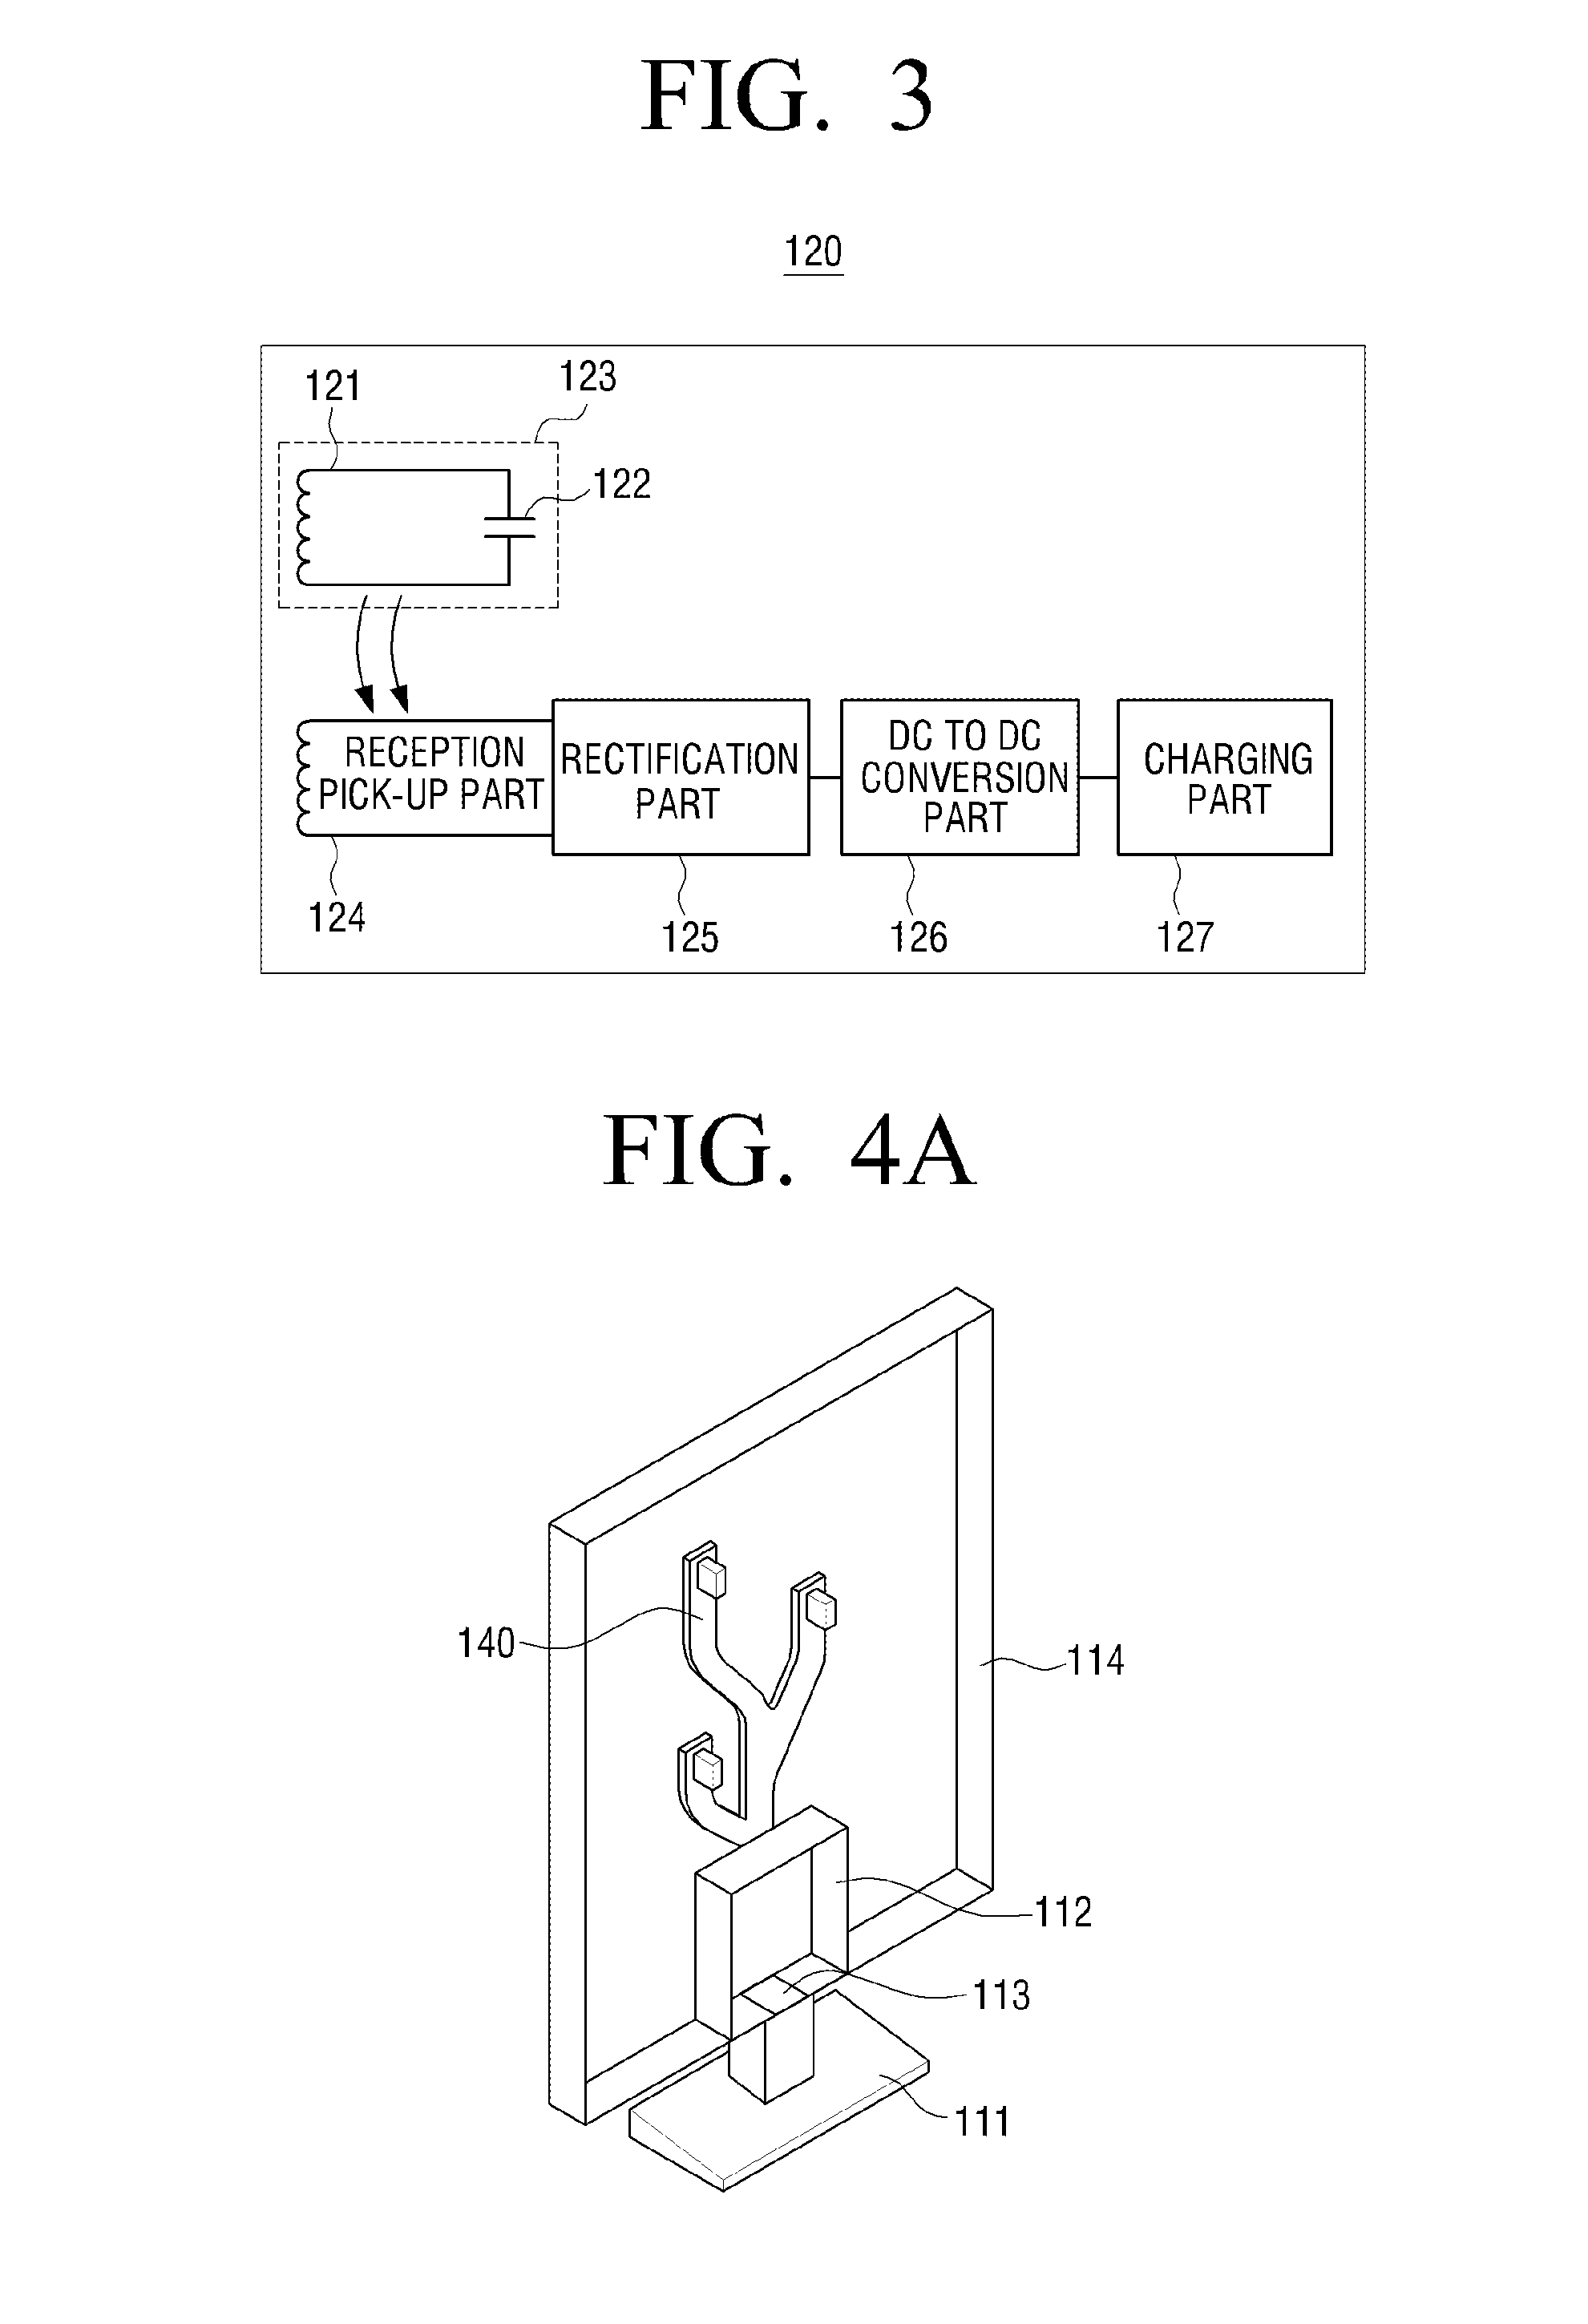 Three-dimensional glasses and system for wireless power transmission